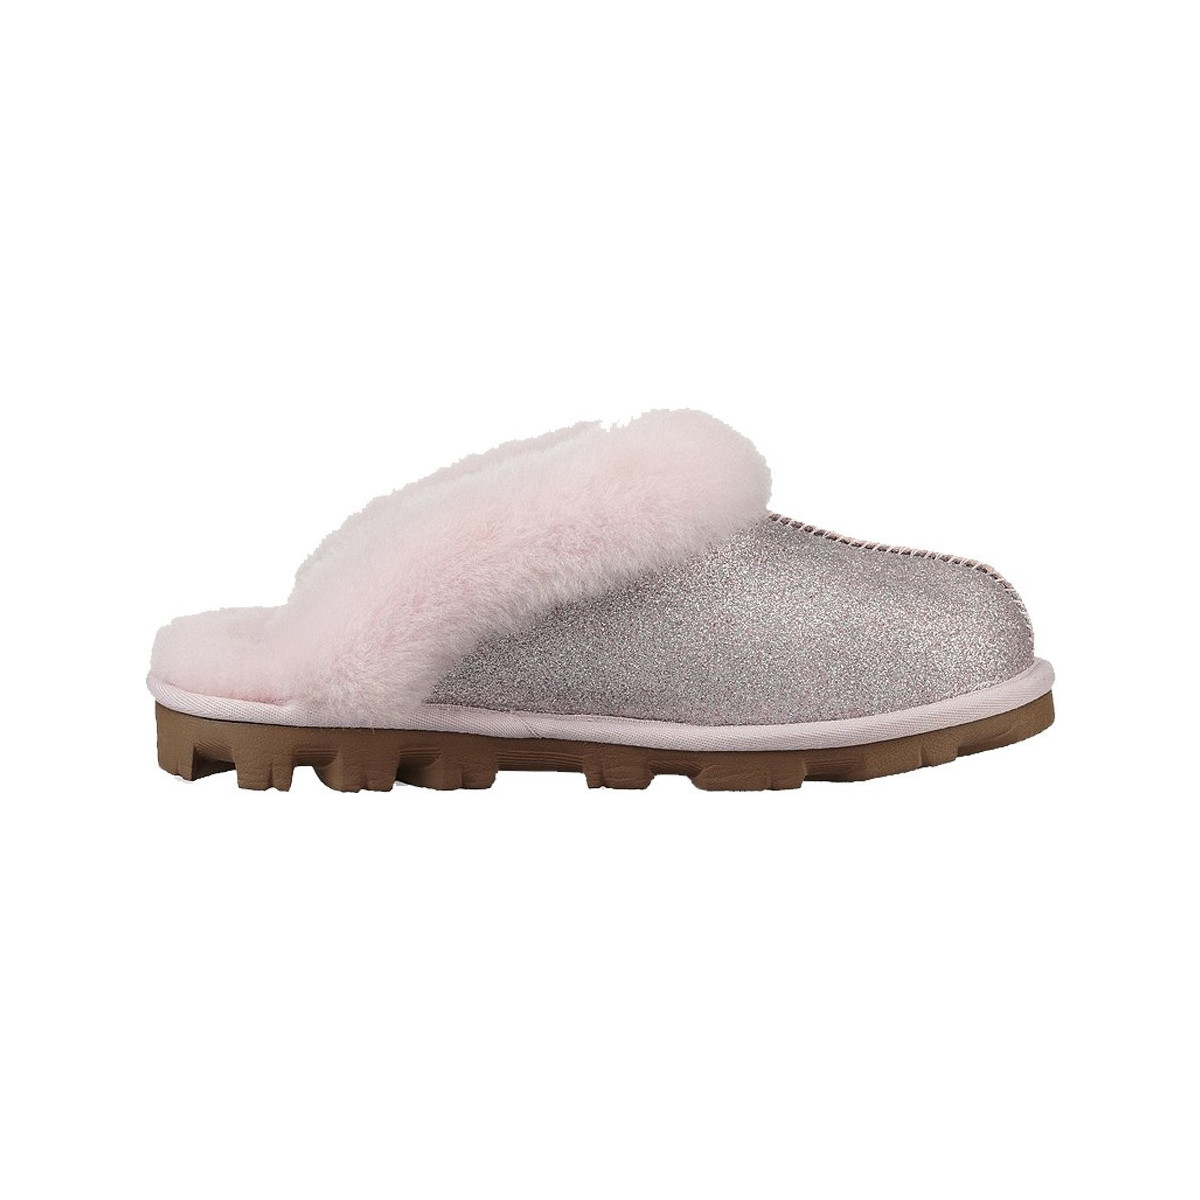 Chaussures Femme Chaussons UGG Coquette Sparkle Rose